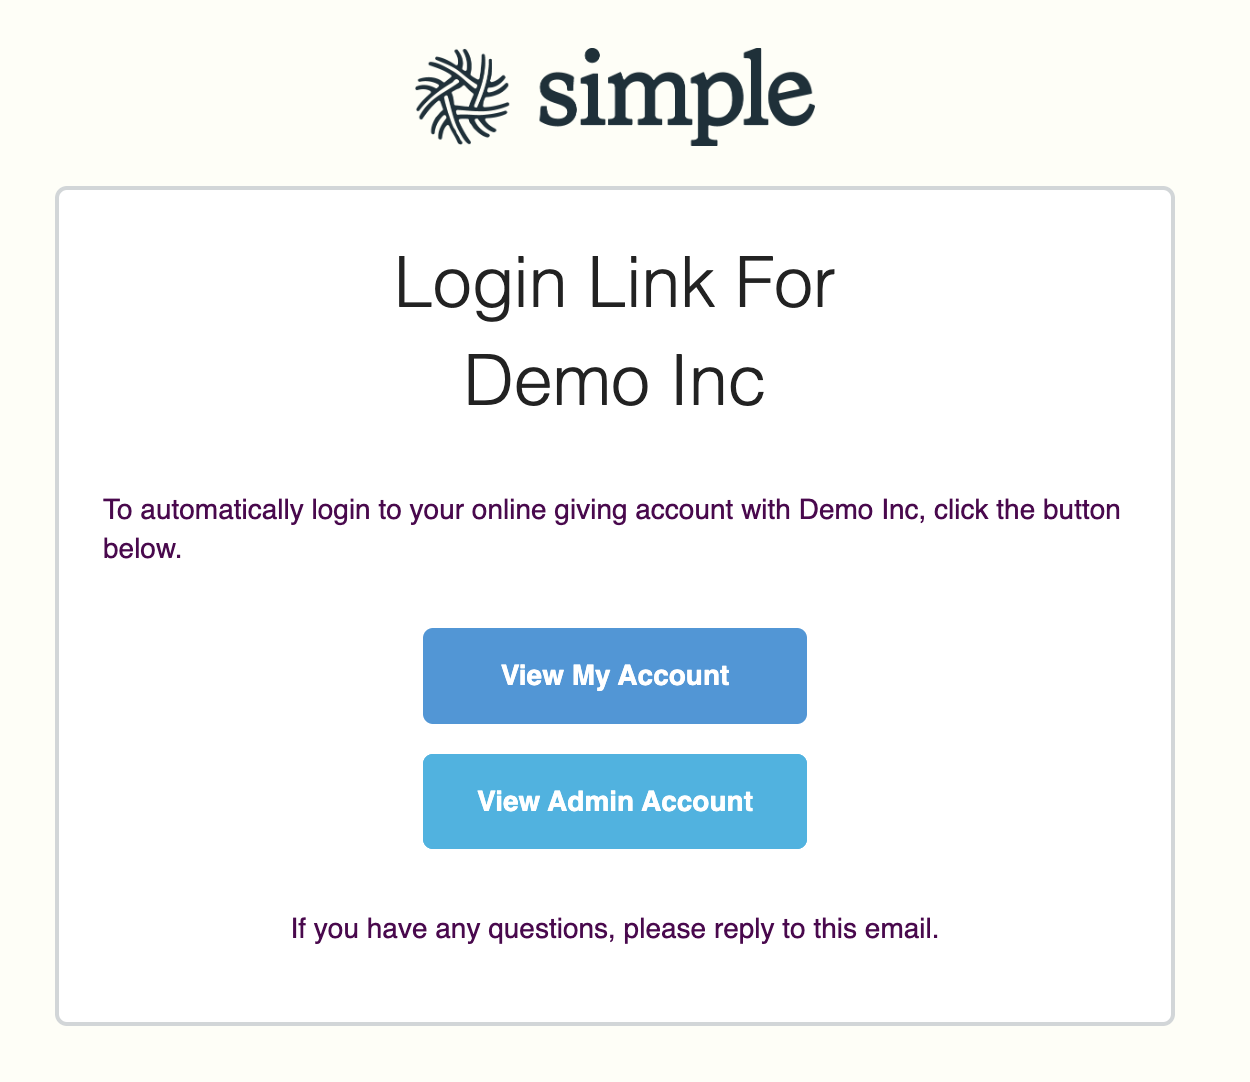 admin login email example